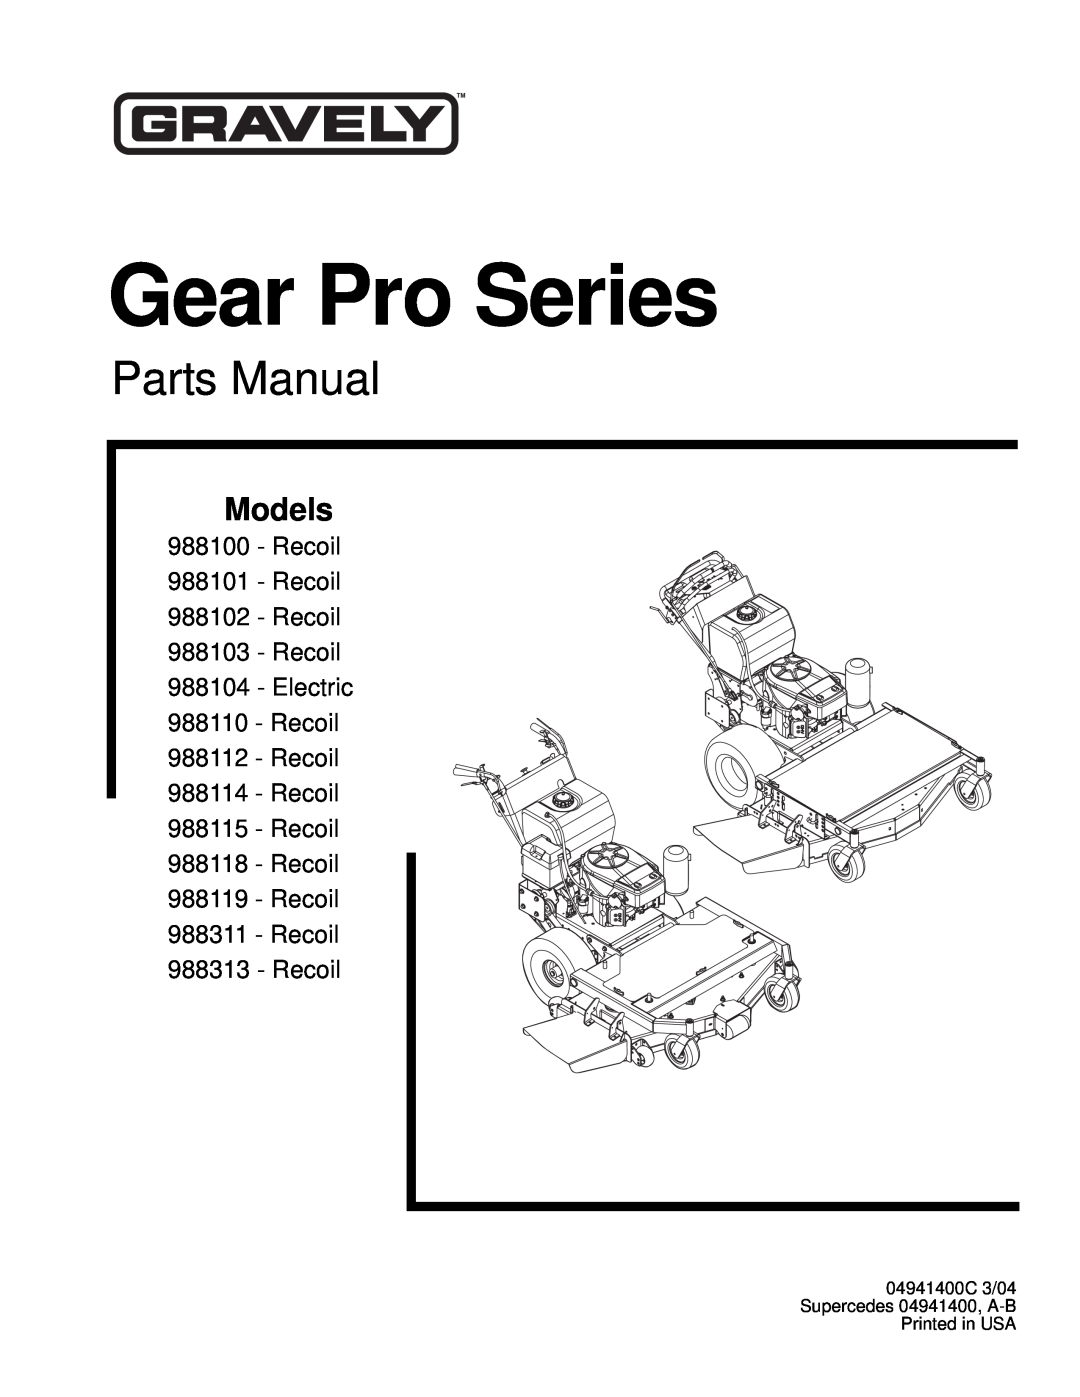 Gravely 988118, 988311, 988119, 988115 manual Models, Gear Pro Series, Parts Manual, Recoil 988101 - Recoil 988102 - Recoil 